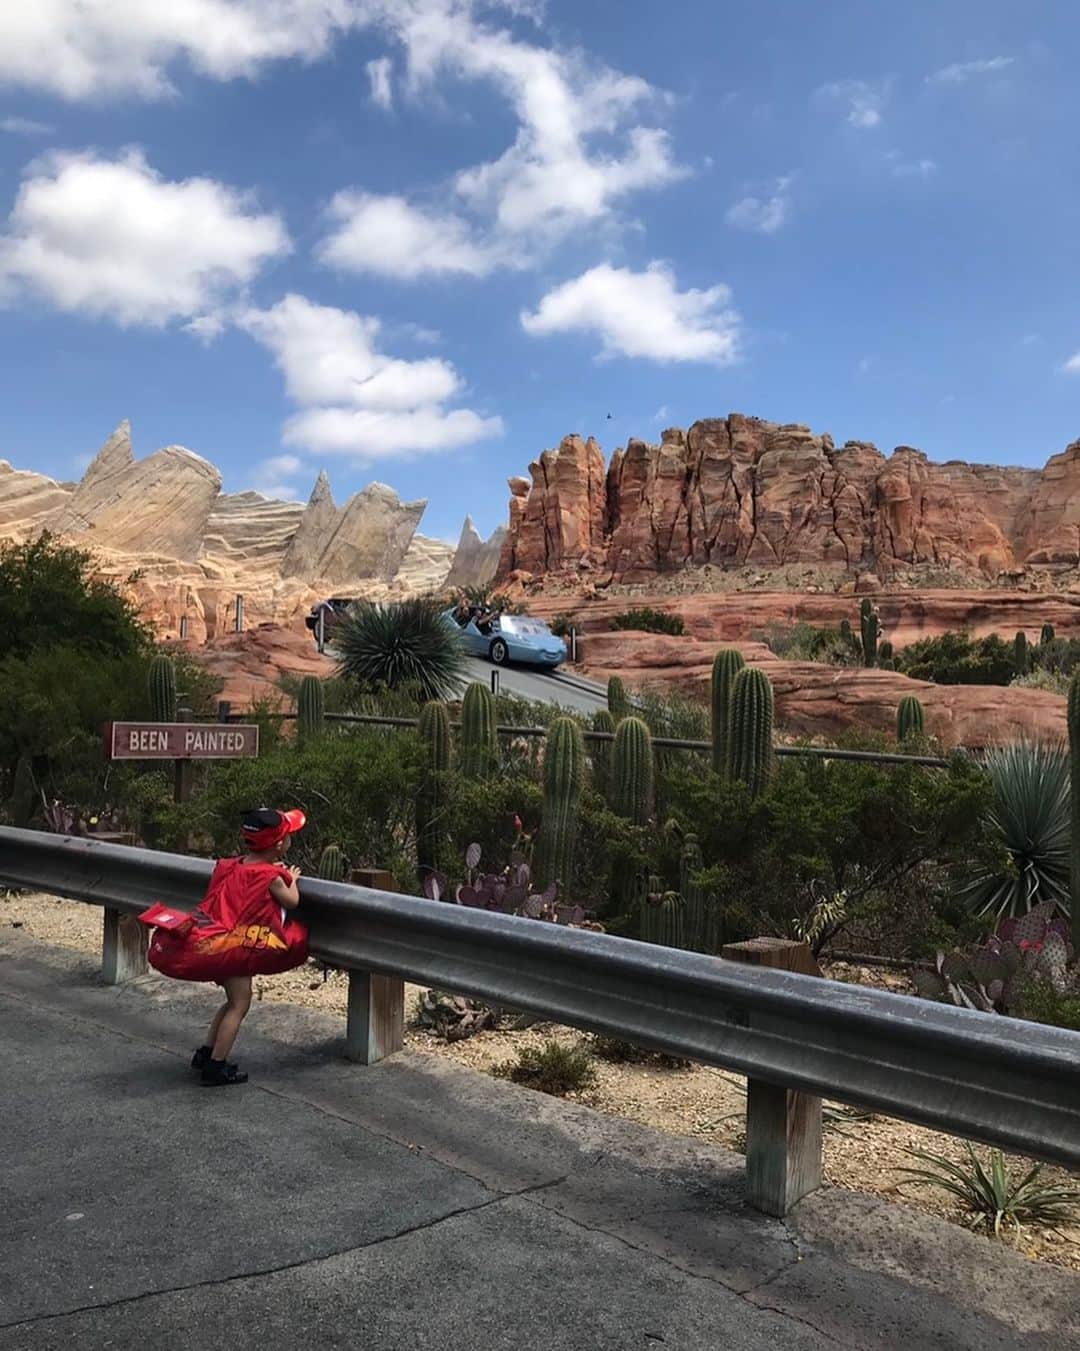 tiahy__さんのインスタグラム写真 - (tiahy__Instagram)「How exciting!!”A touch of Disney“ will be comming to Disney California Adventure Park beginning March 18th! I've also been waiting for this news to come. I hope it makes your day more magical with smile!!. . . . . 撮影📸👨🏻. (レッドがtaiちゃんを見ながら寄り添ってくれている、お気に入りの写真です🚒☺️).  . . . 大好きな大好きな大好きな場所の再開🎡. 8ヶ月間もパークに入ることができず再開を待ち望んでいたアメリカの人々が、魔法にかけられたような素晴らしい一日を笑顔で過ごせますように… .  #disneycaliforniaadventure #mcqueen_taia#mater_taia#disneycaliforniaadventurepark#cars#lightningmcqueen #カーズ #マックィーン」2月25日 23時53分 - tiahy__disney